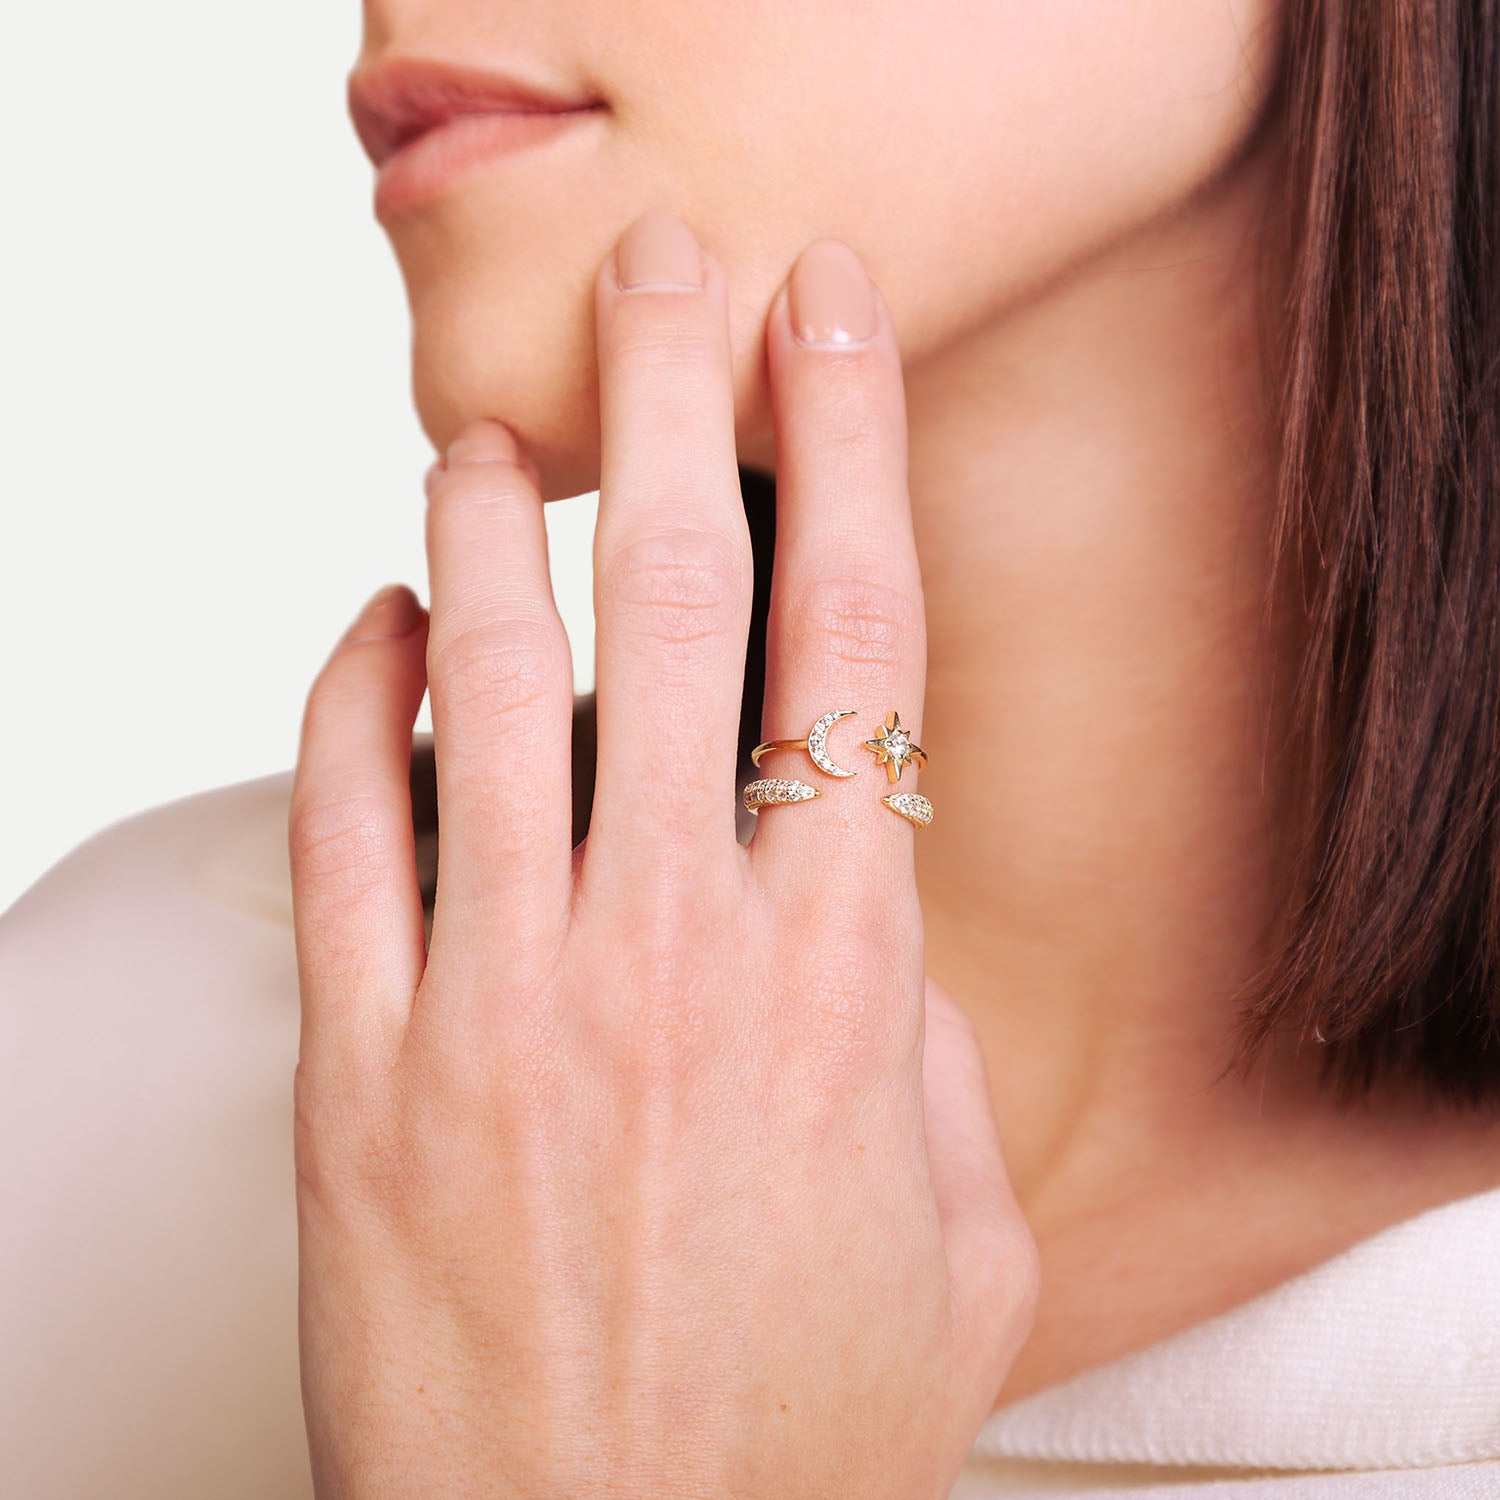 Female Model Wearing Stacked Gold Moon and Star Ring Ariel - Playa Luna Jewelry